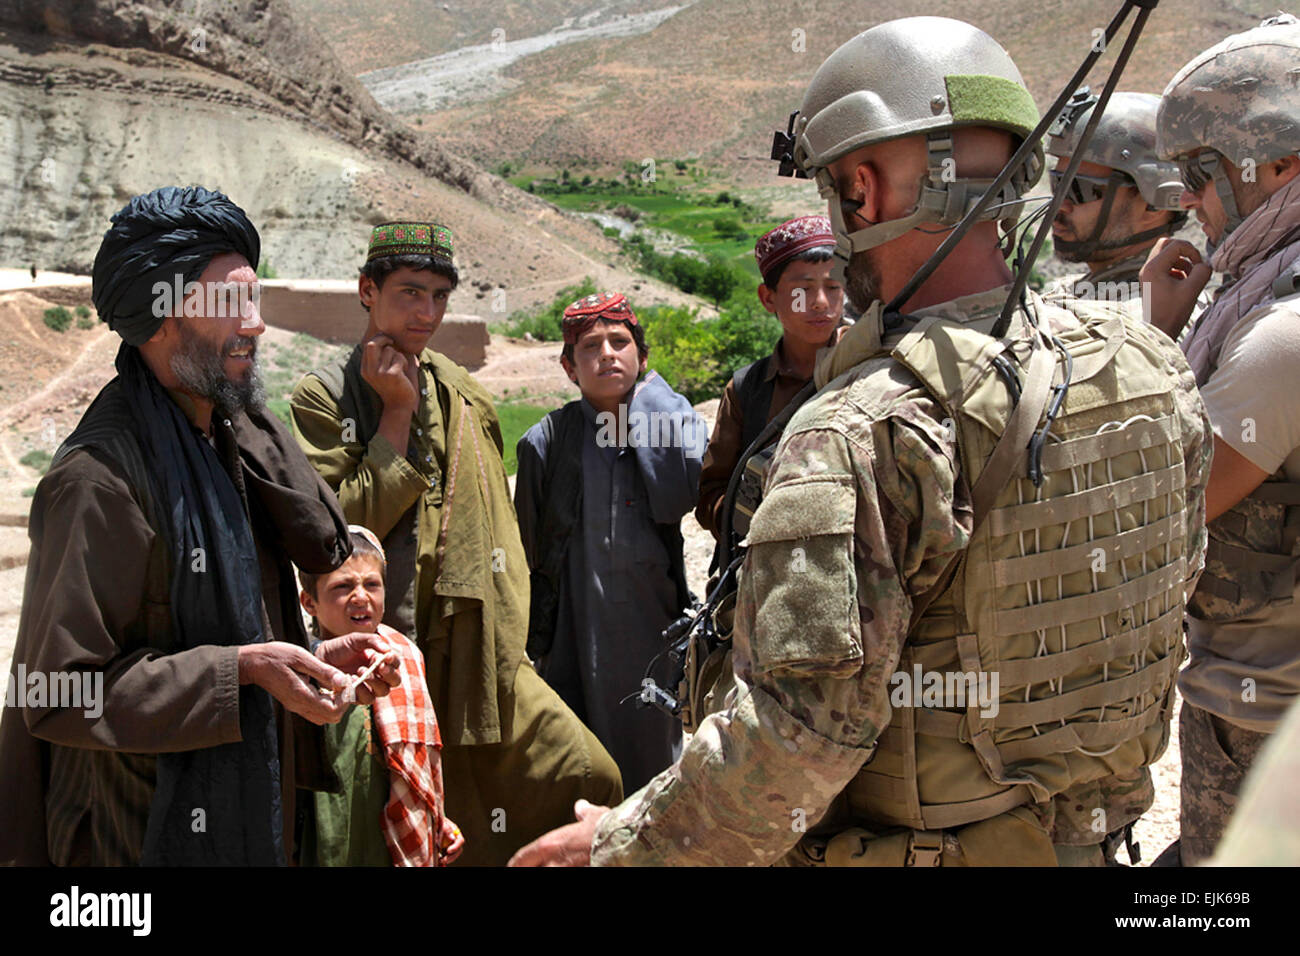 U.S. Army Special Forces Soldiers speak with a village elder during a Convoy Reconnaissance Patrol at Badamak, in the Uruzgan province of Afghanistan, May 23, 2011.  The purpose of the patrol is to build relationships and trust with local citizens and assess safety, security, and insurgent threats in the area.  Pfc. Simon Lee Stock Photo